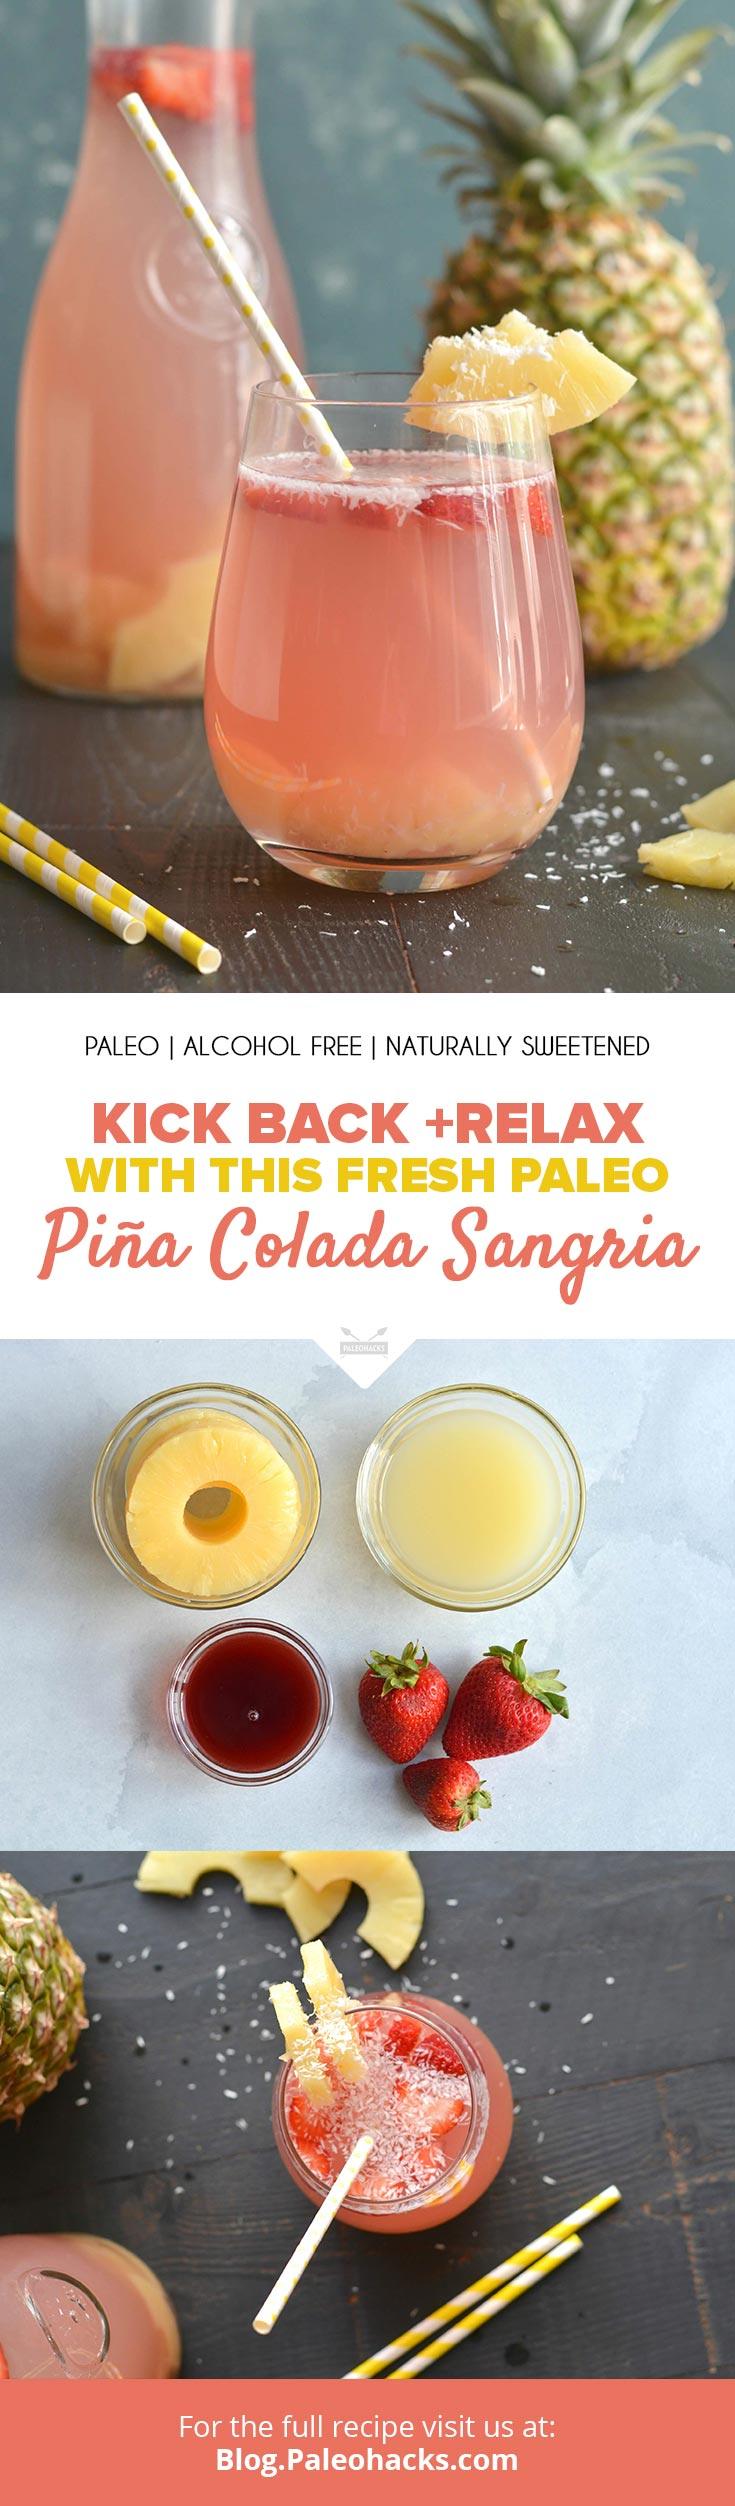 This homemade Piña Colada Sangria combines fresh pineapple juice, coconut water, and a splash of cherry juice for a flavor bursting with tropical flavor.